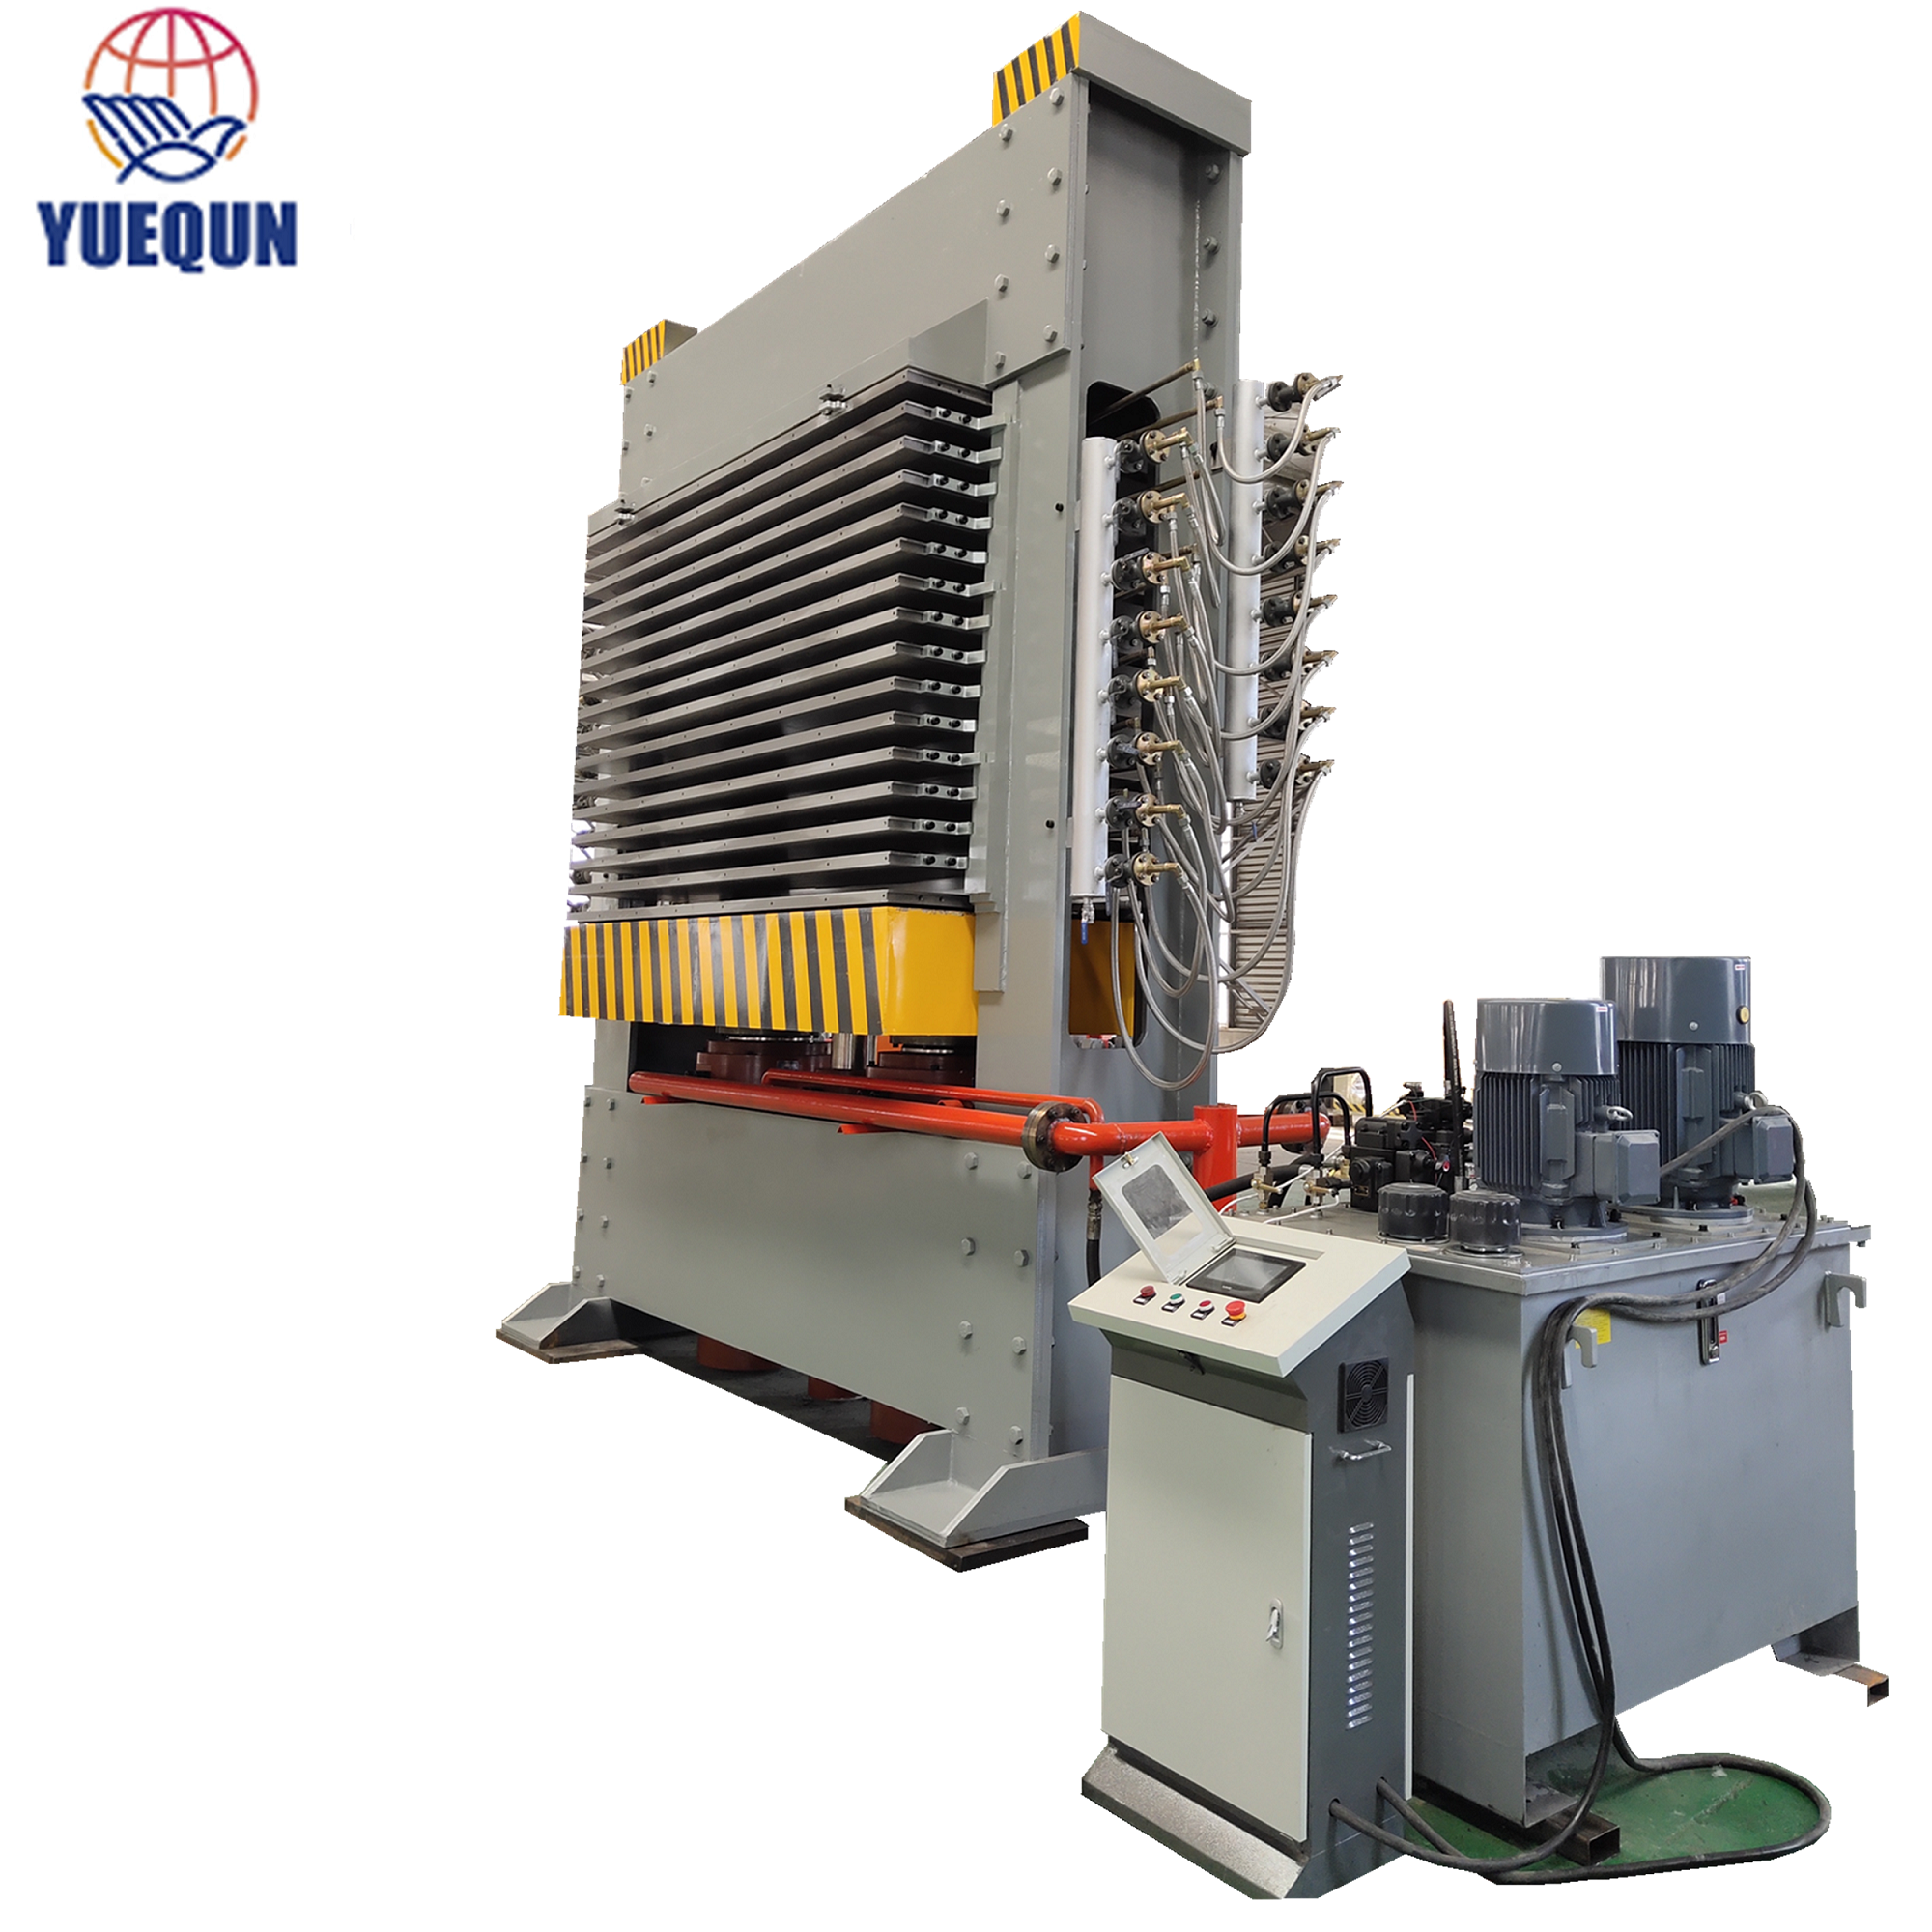 Hydraulic Hot Presses Machine for Plywood MDF Particle Board